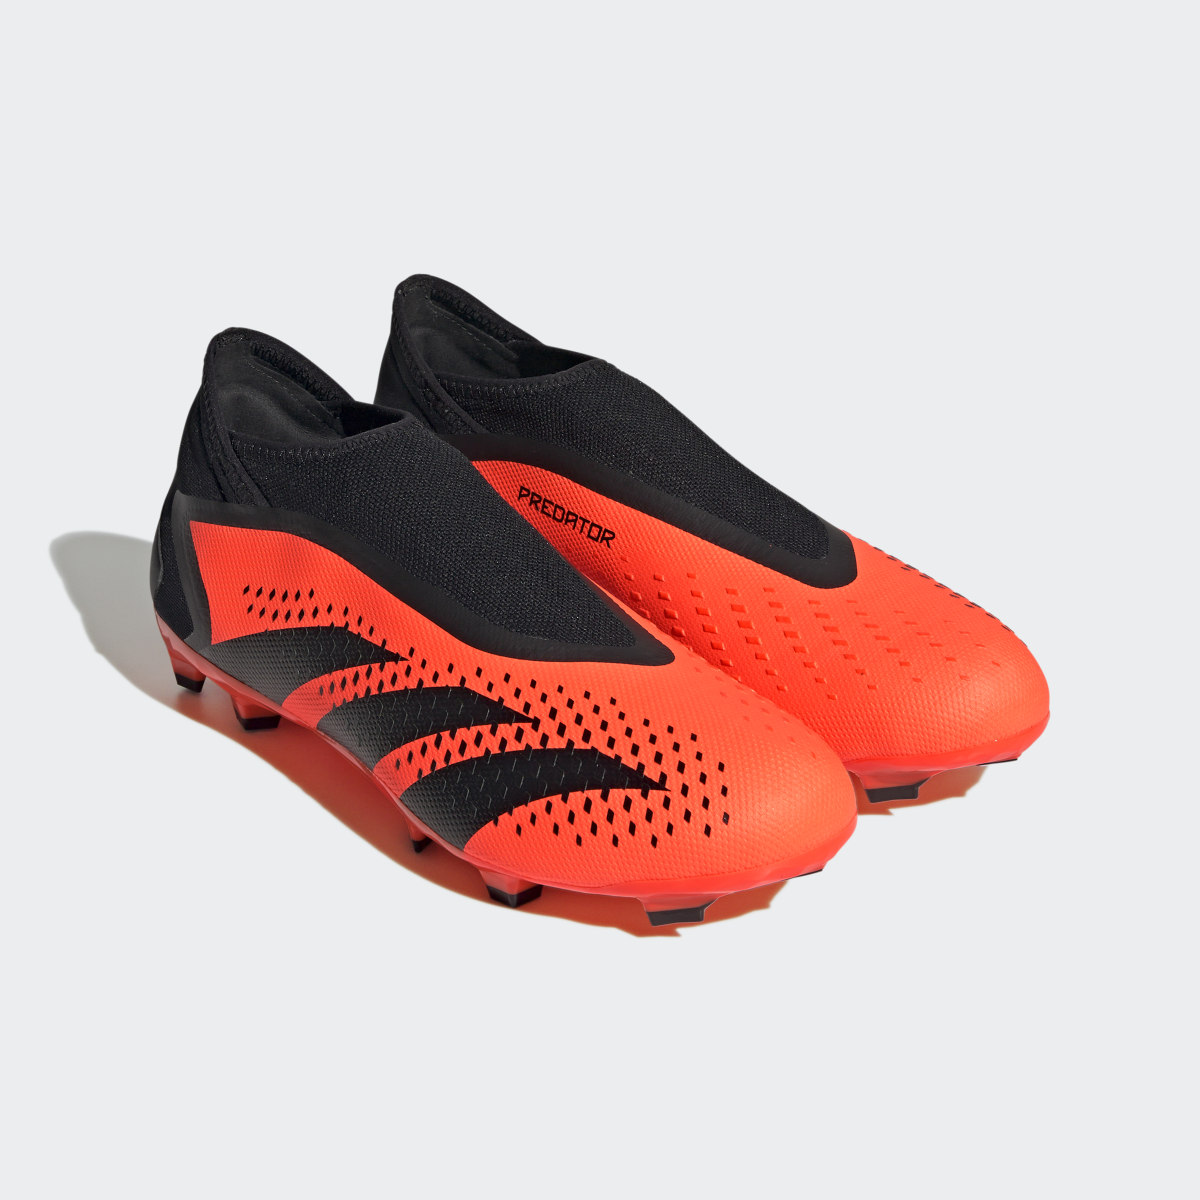 Adidas Predator Accuracy.3 Laceless Firm Ground Boots. 5